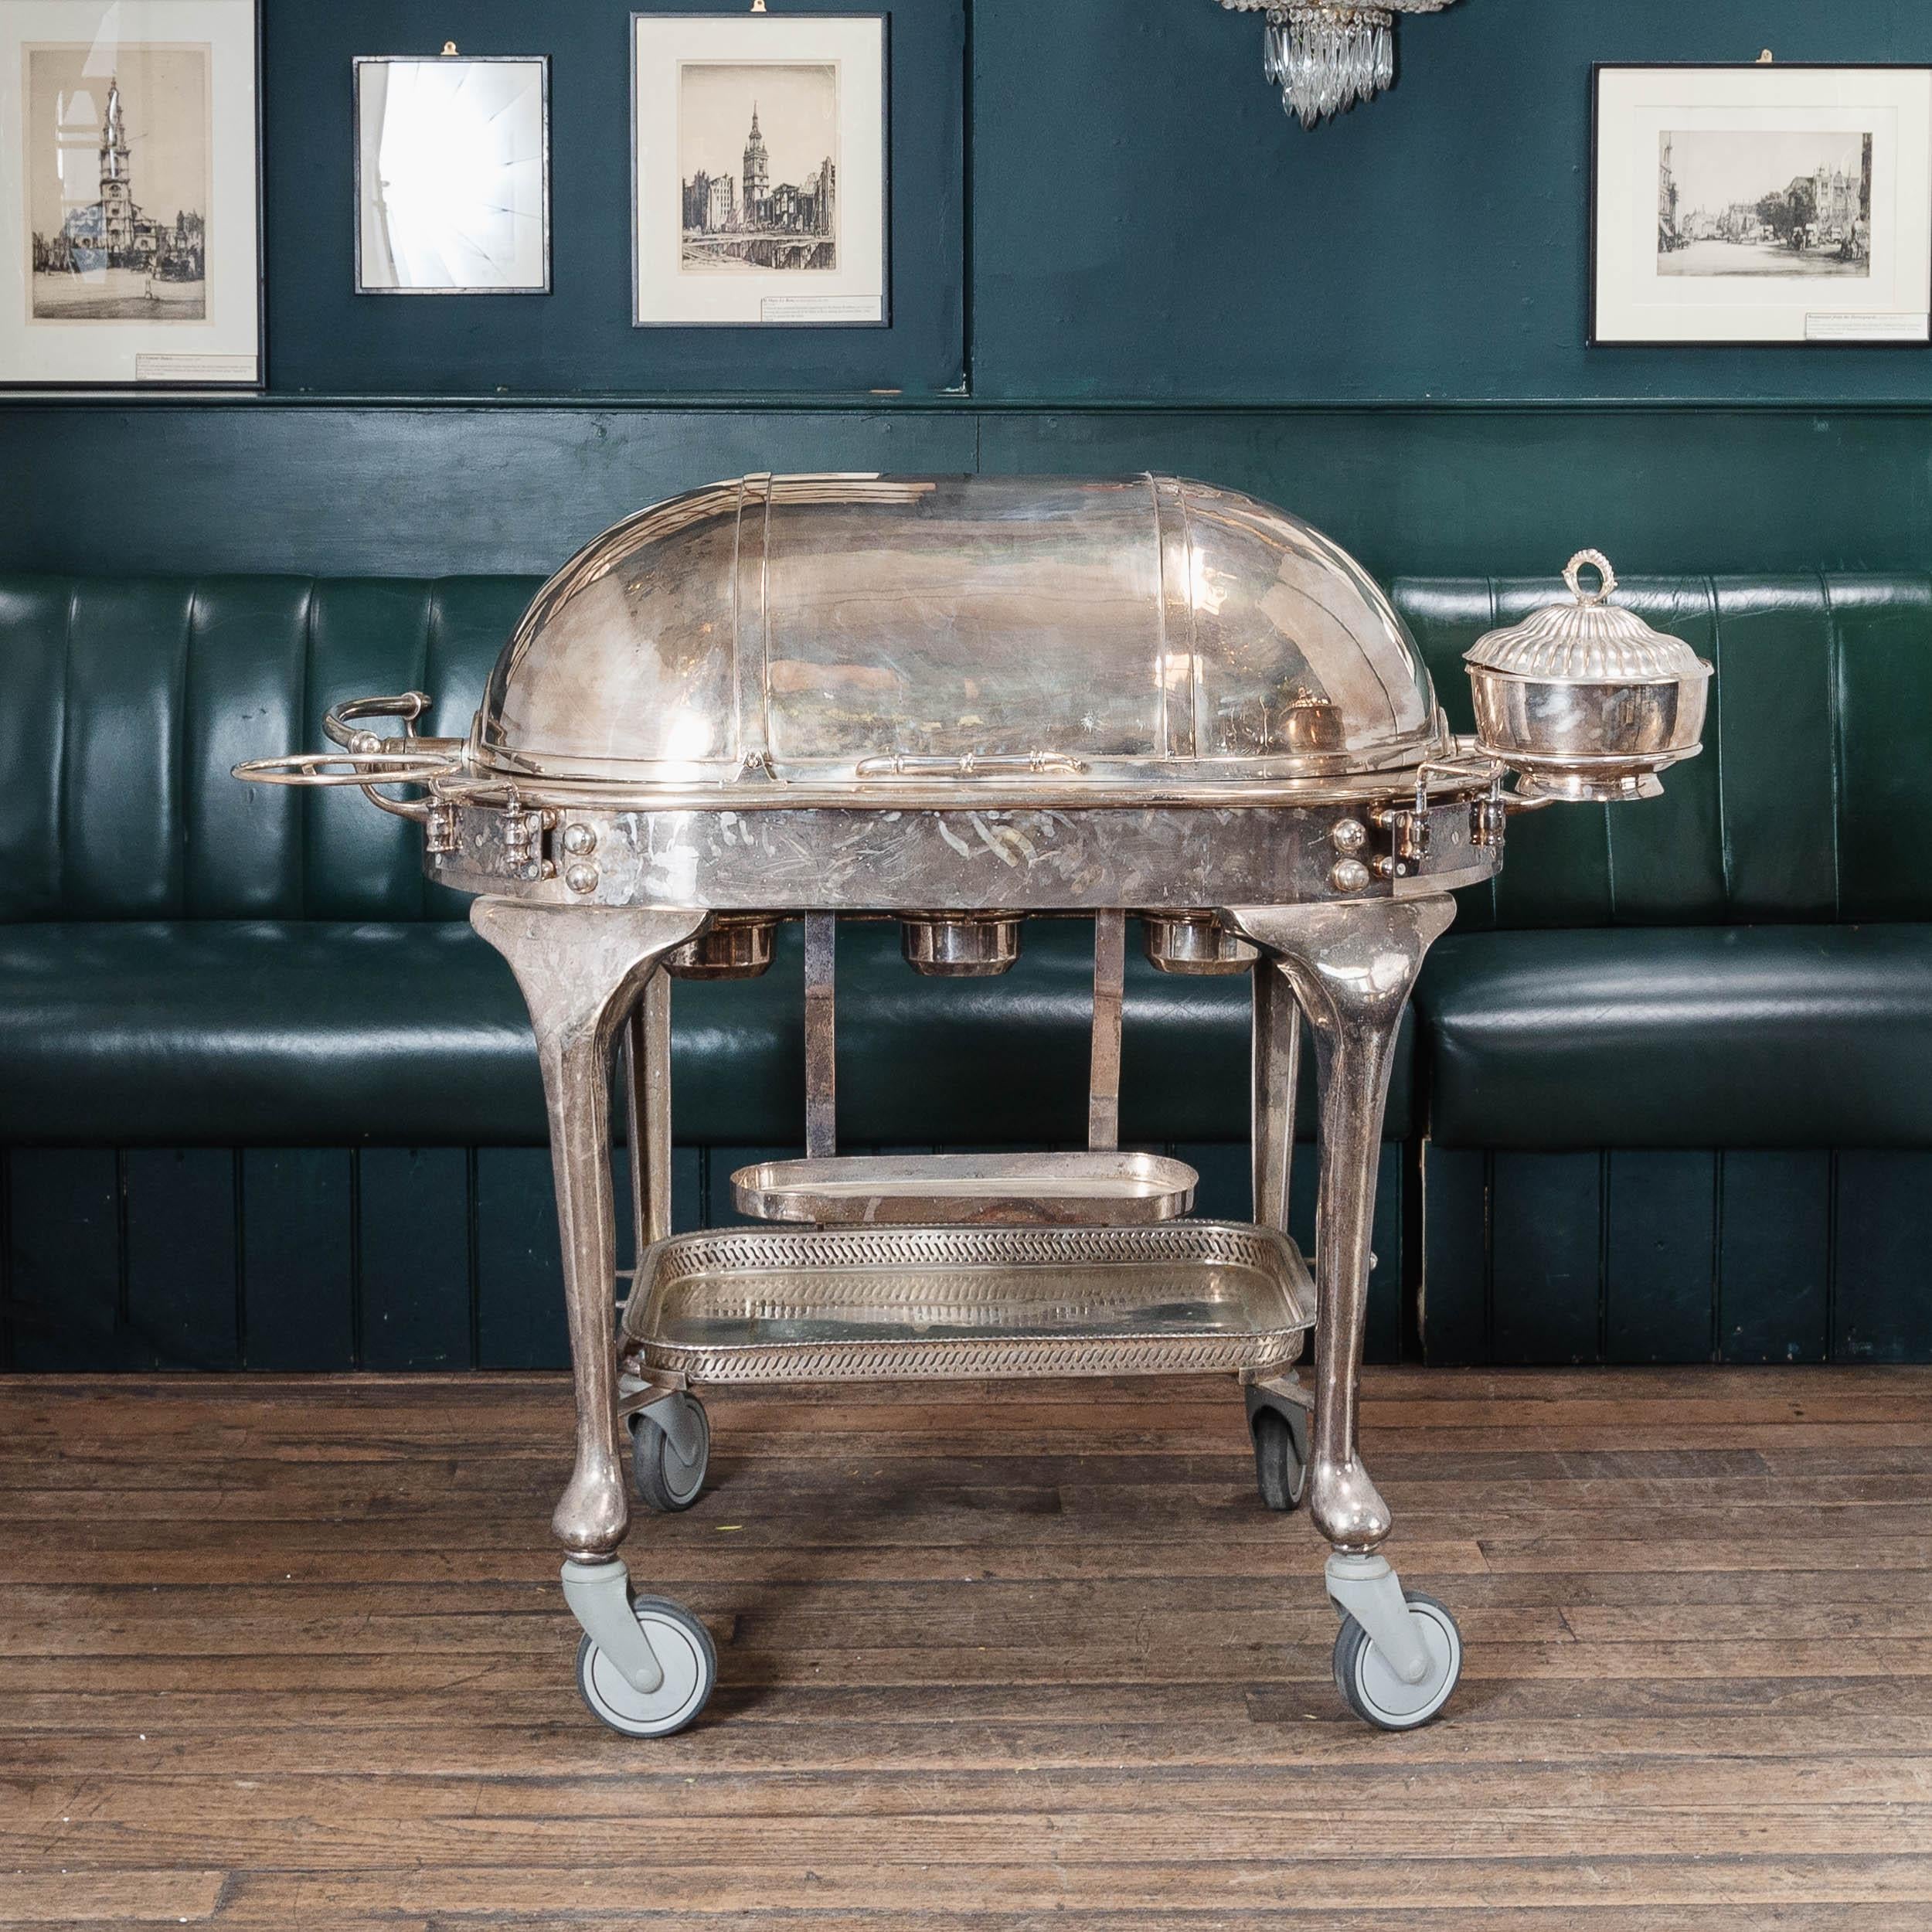 An early twentieth century large silver plated beef trolley with hallmark to the underside for 'James Deakin & Sons Ltd' of Sheffield, the roll-top lid opening to reveal carving board and three sauce vessels,  with three oil burners below, all